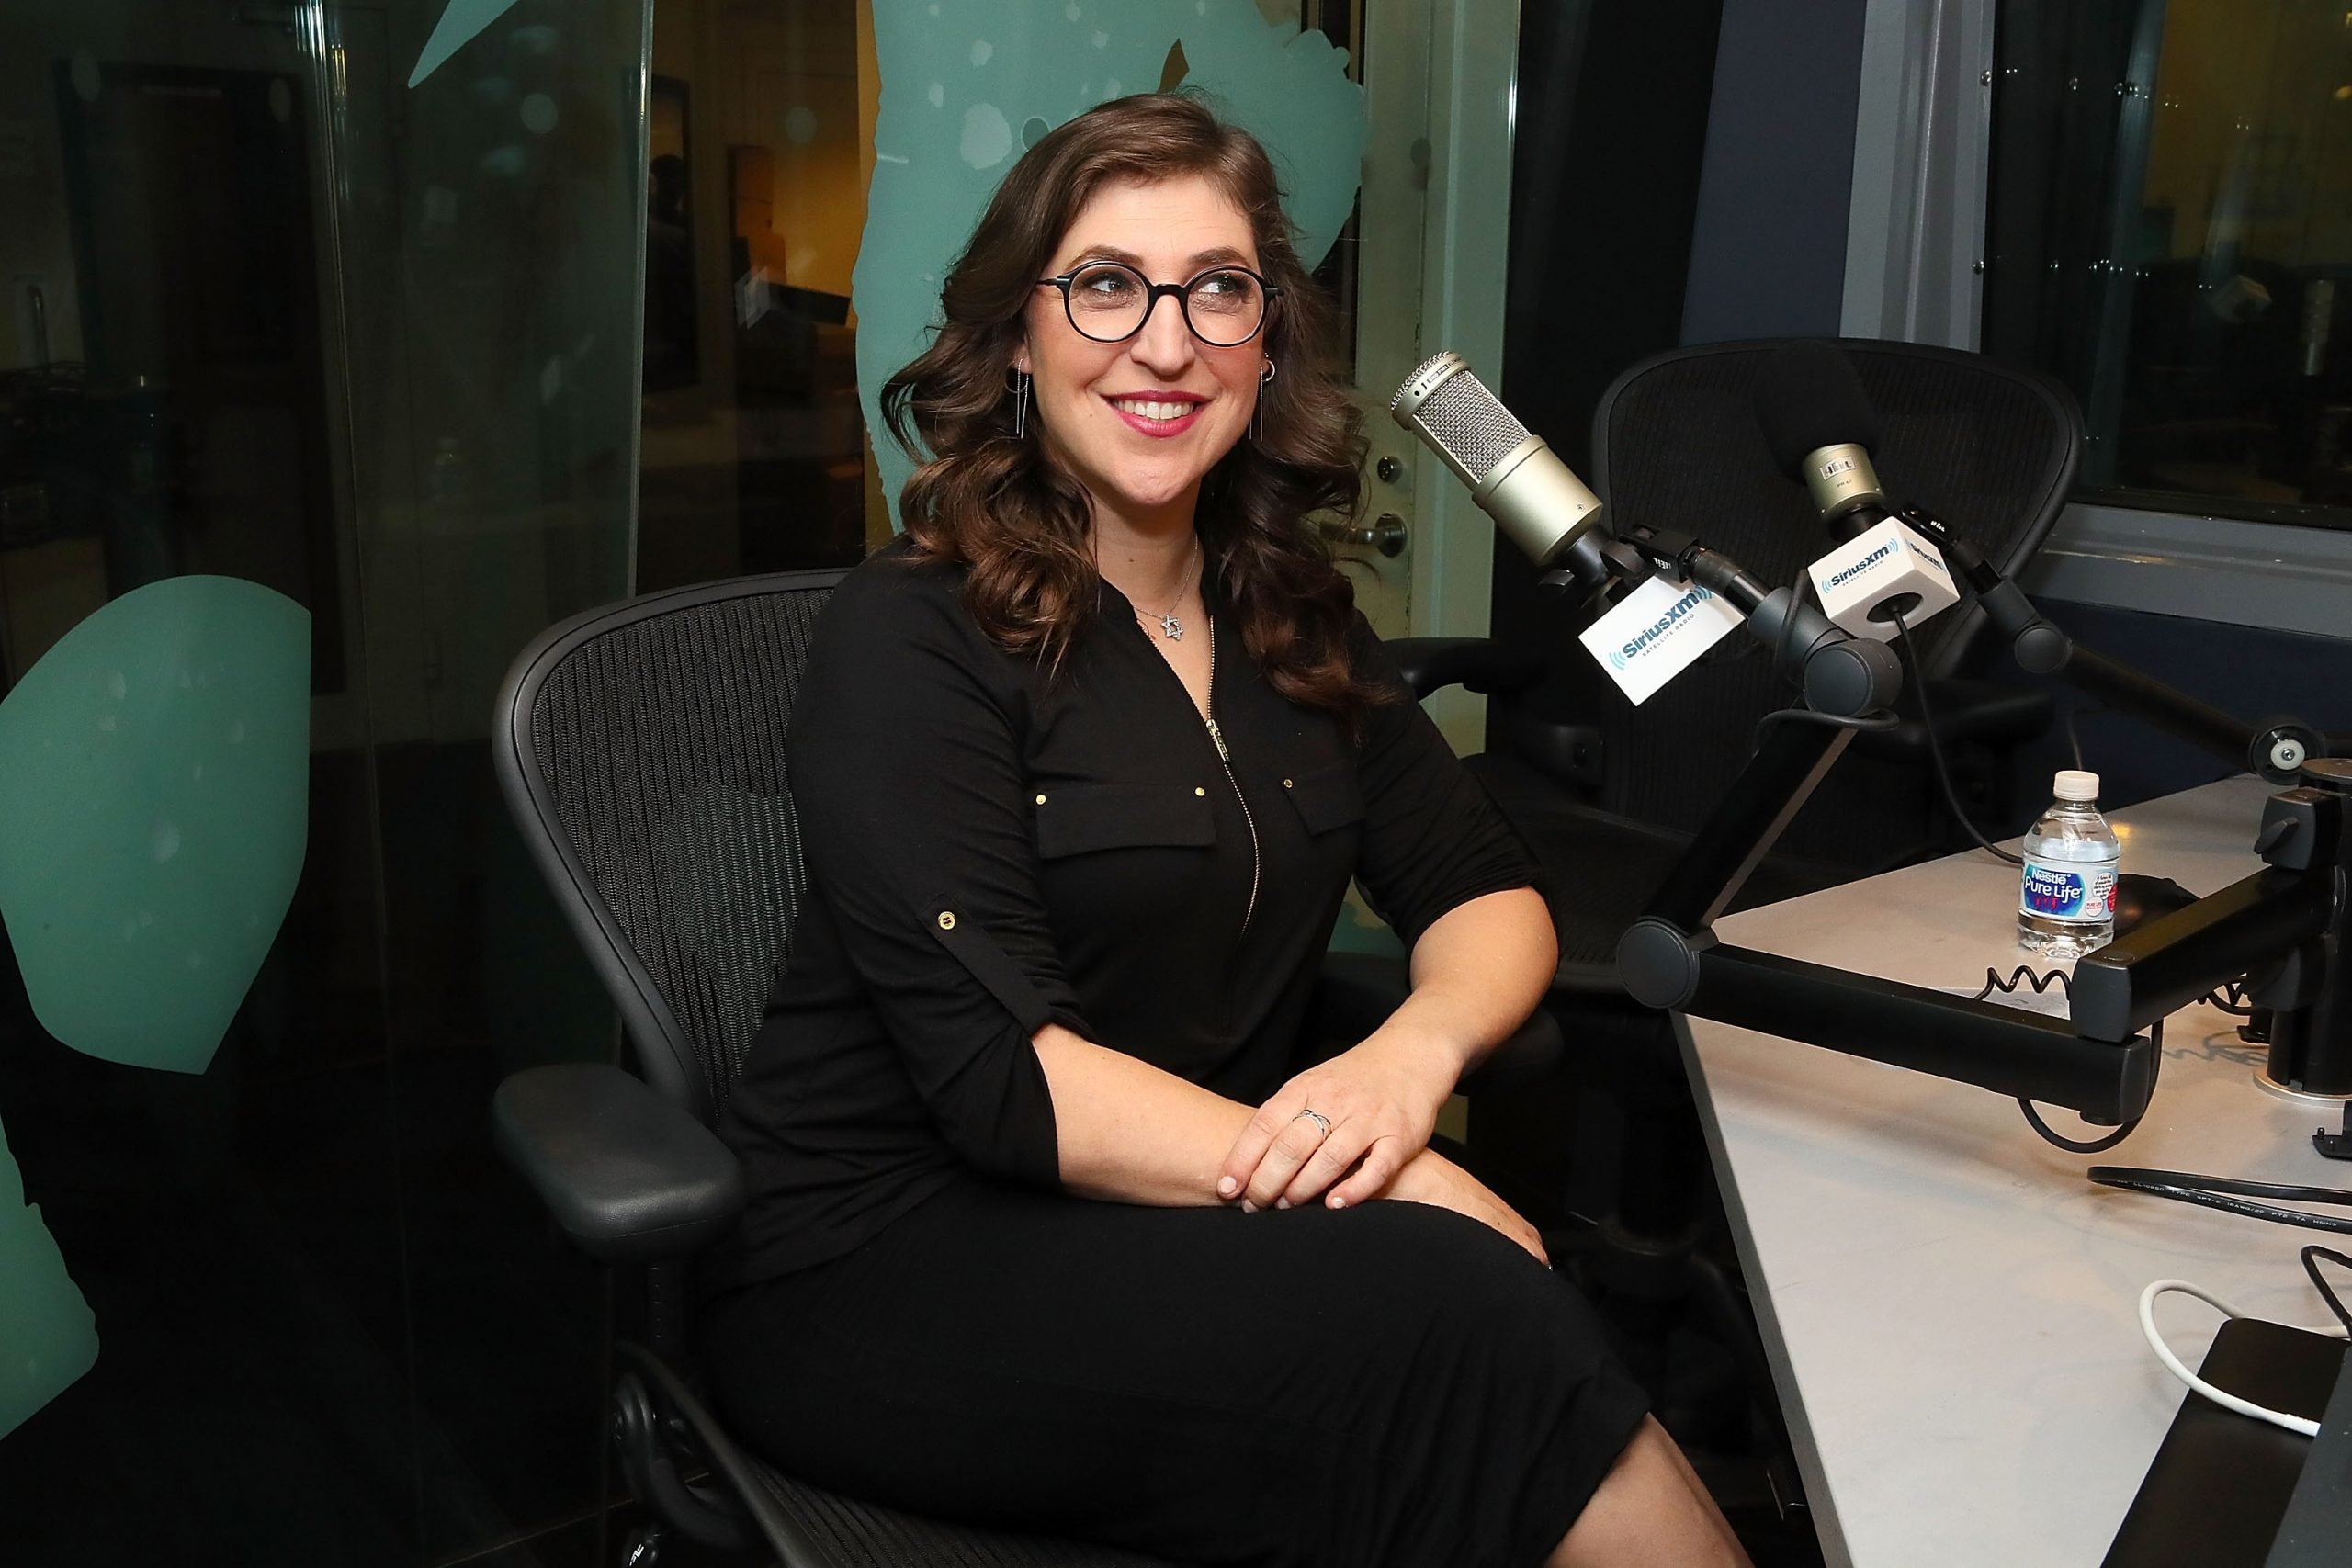 Actor and neuroscientist Mayim Bialik in a 2018 interview